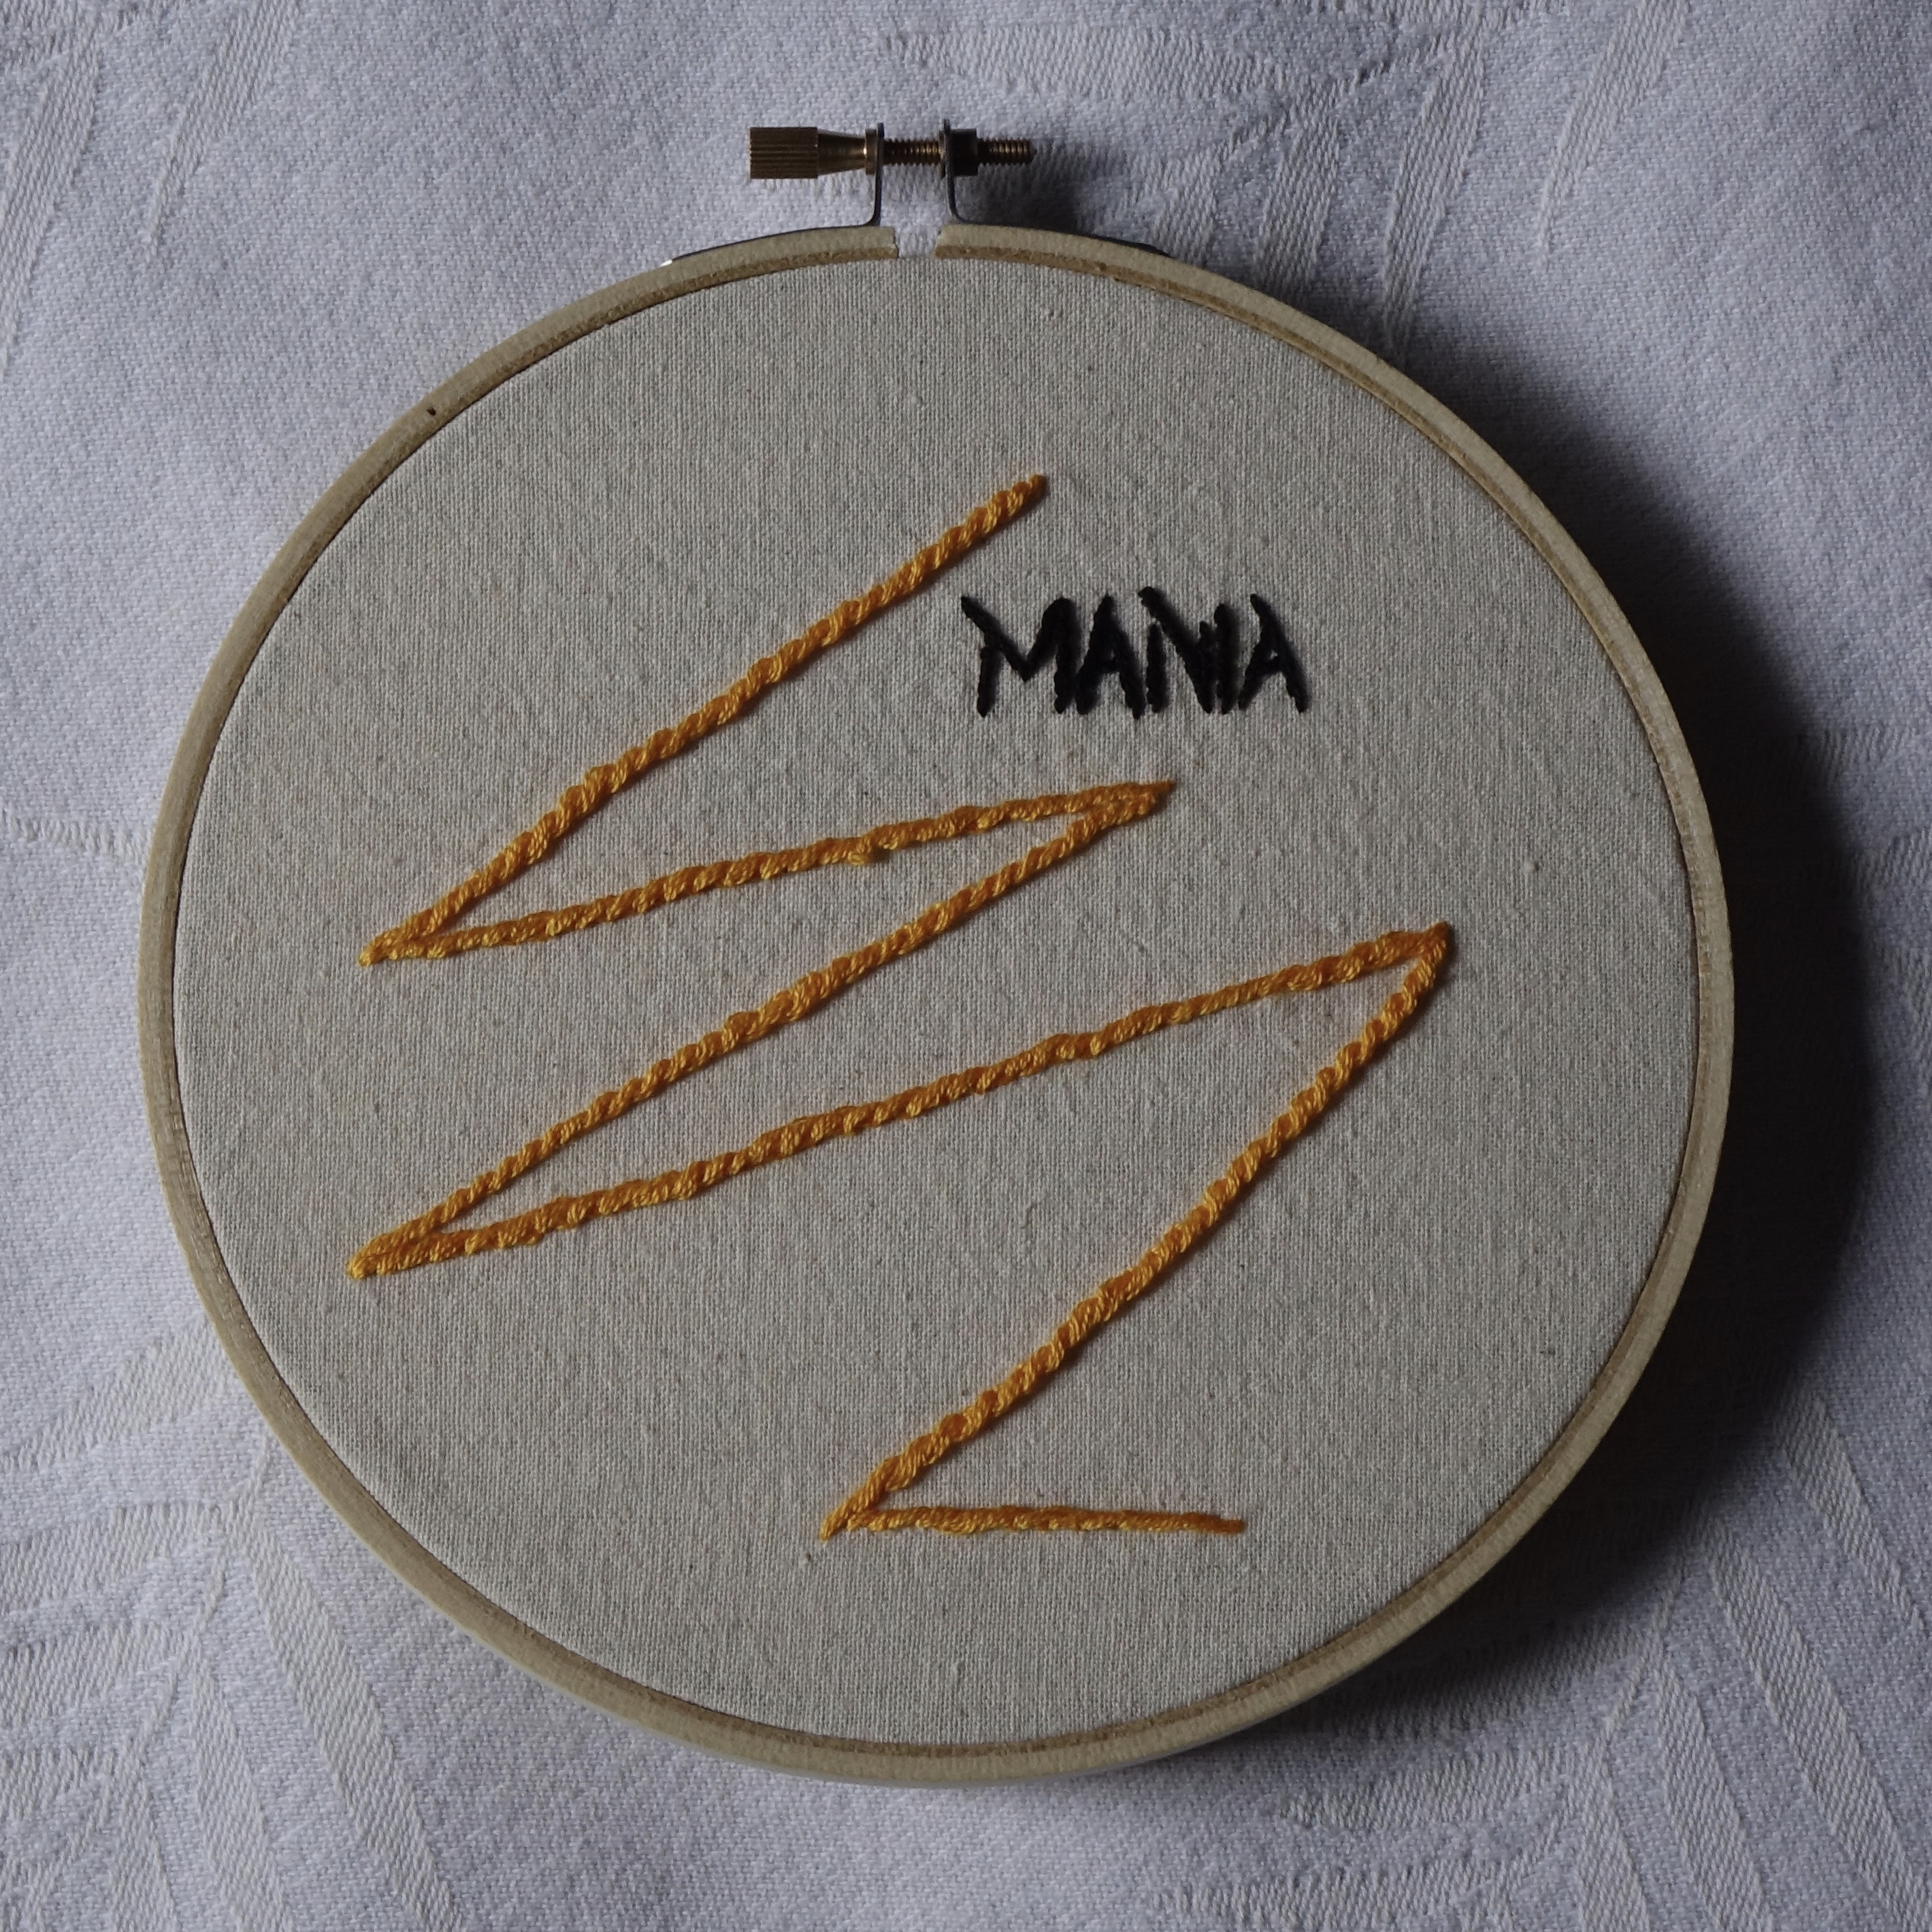 "MANIA" embroidered in black with an orange lightning bolt. 